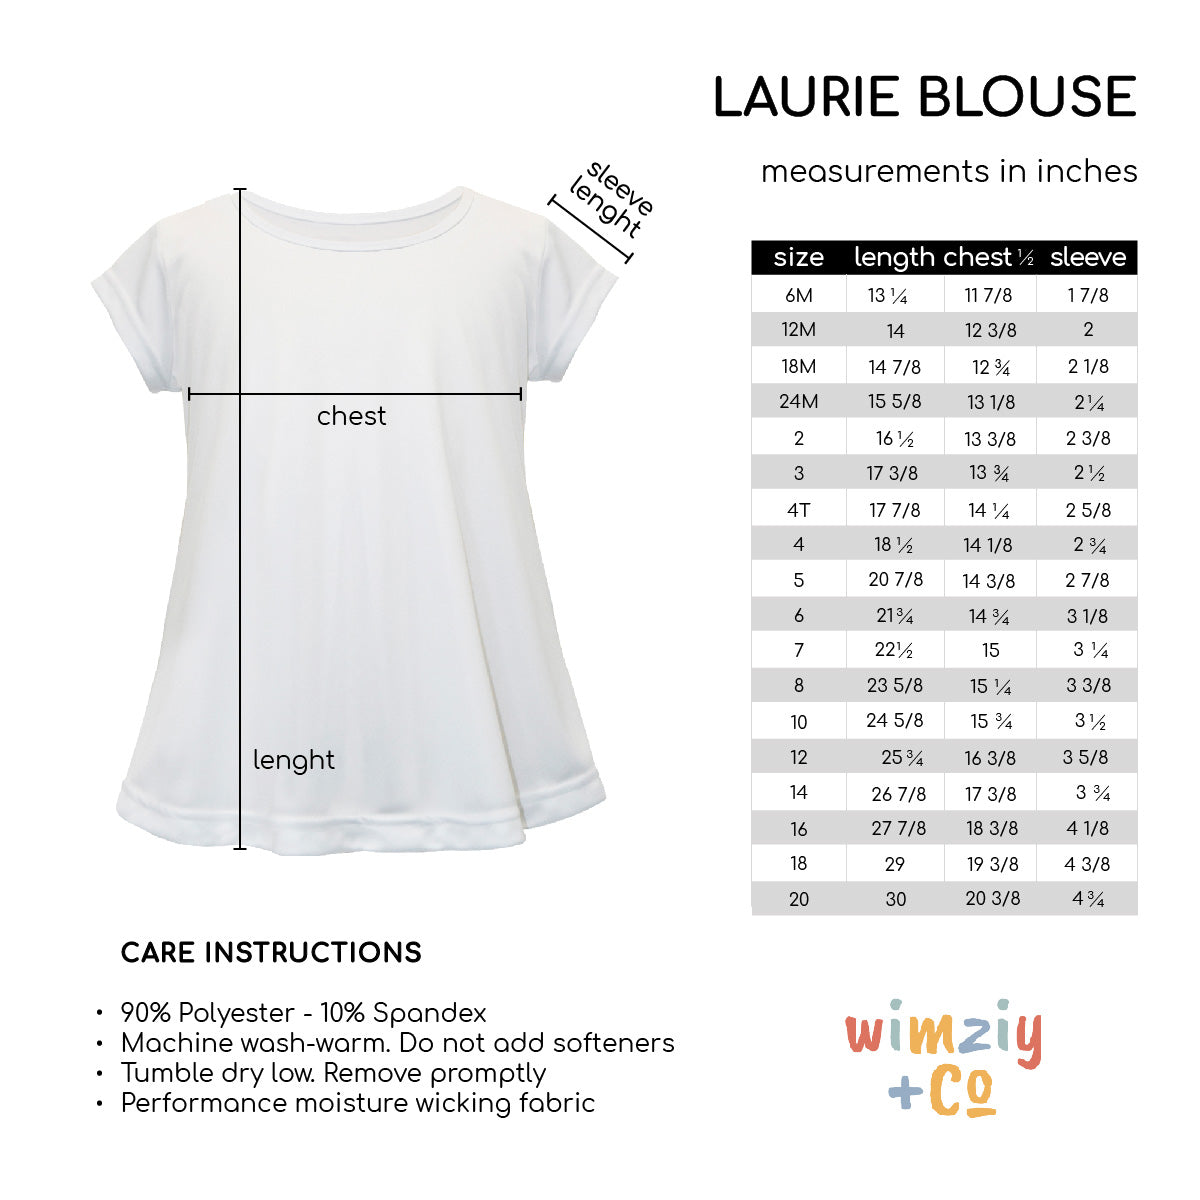 Cowgirl and Personalized Name Black Short Sleeve Laurie Top - Wimziy&Co.